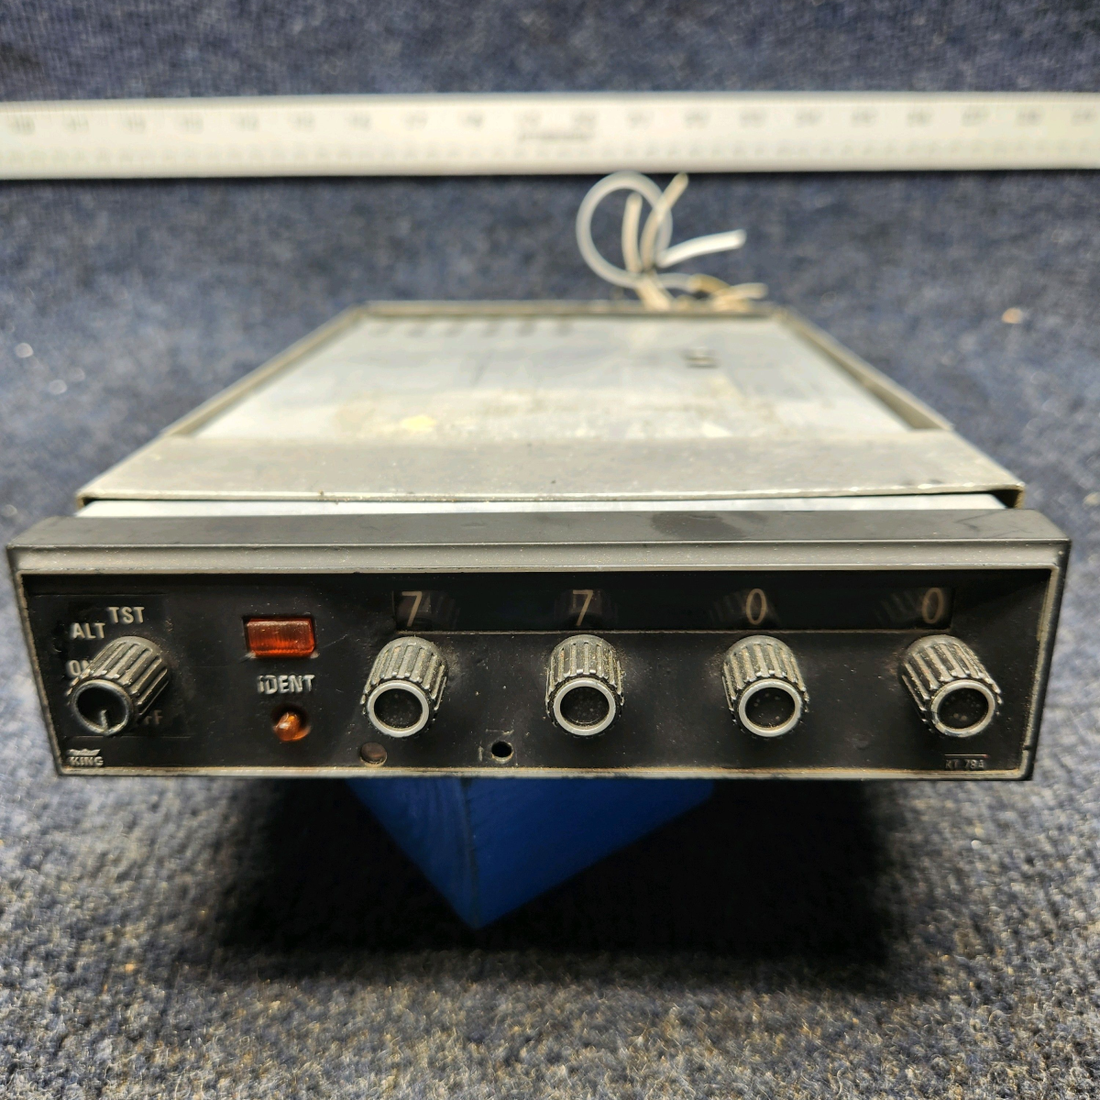 Used aircraft parts for sale, 066-1062-01 PIPIR PA32RT-300 KING KT 78A ATC TRANSPONDER RACK AND CONNECTOR